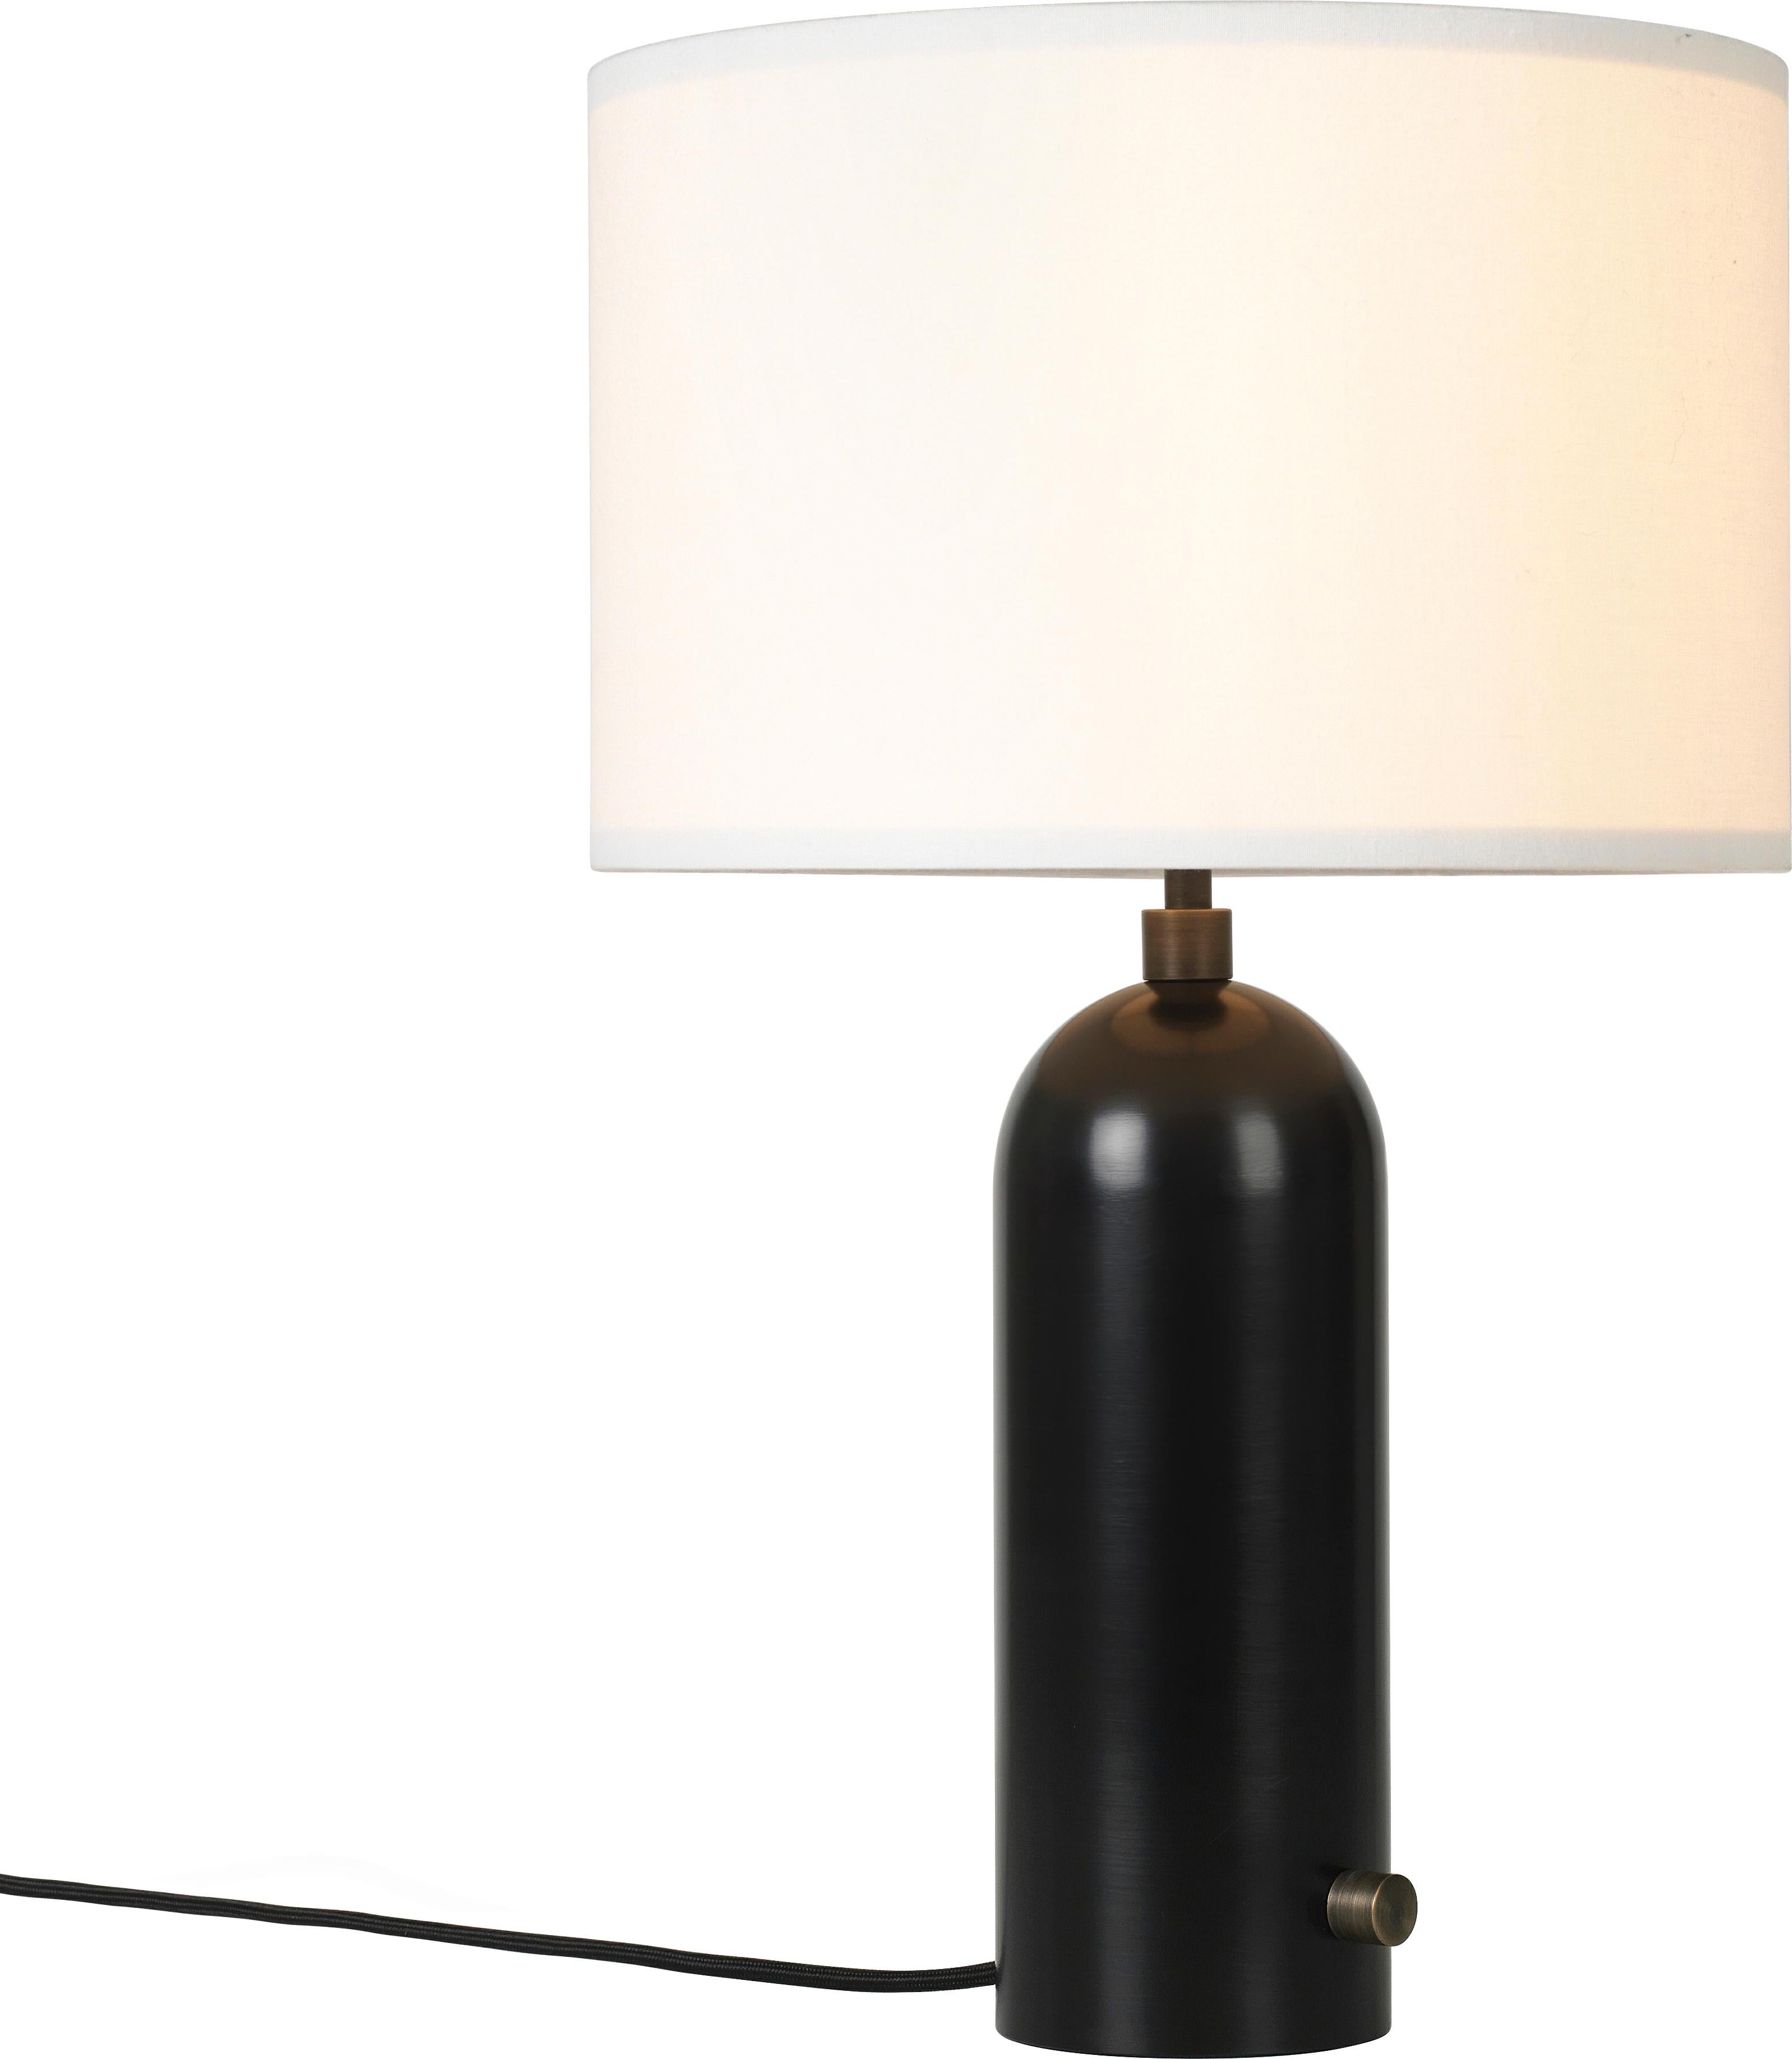 Large 'Gravity' Blackened Steel Table Lamp by Space Copenhagen for Gubi.

Executed in blackened steel with a canvas or white textile shade perched atop its stem, the Gravity table lamp designed by Space Copenhagen for GUBI contrasts strength and